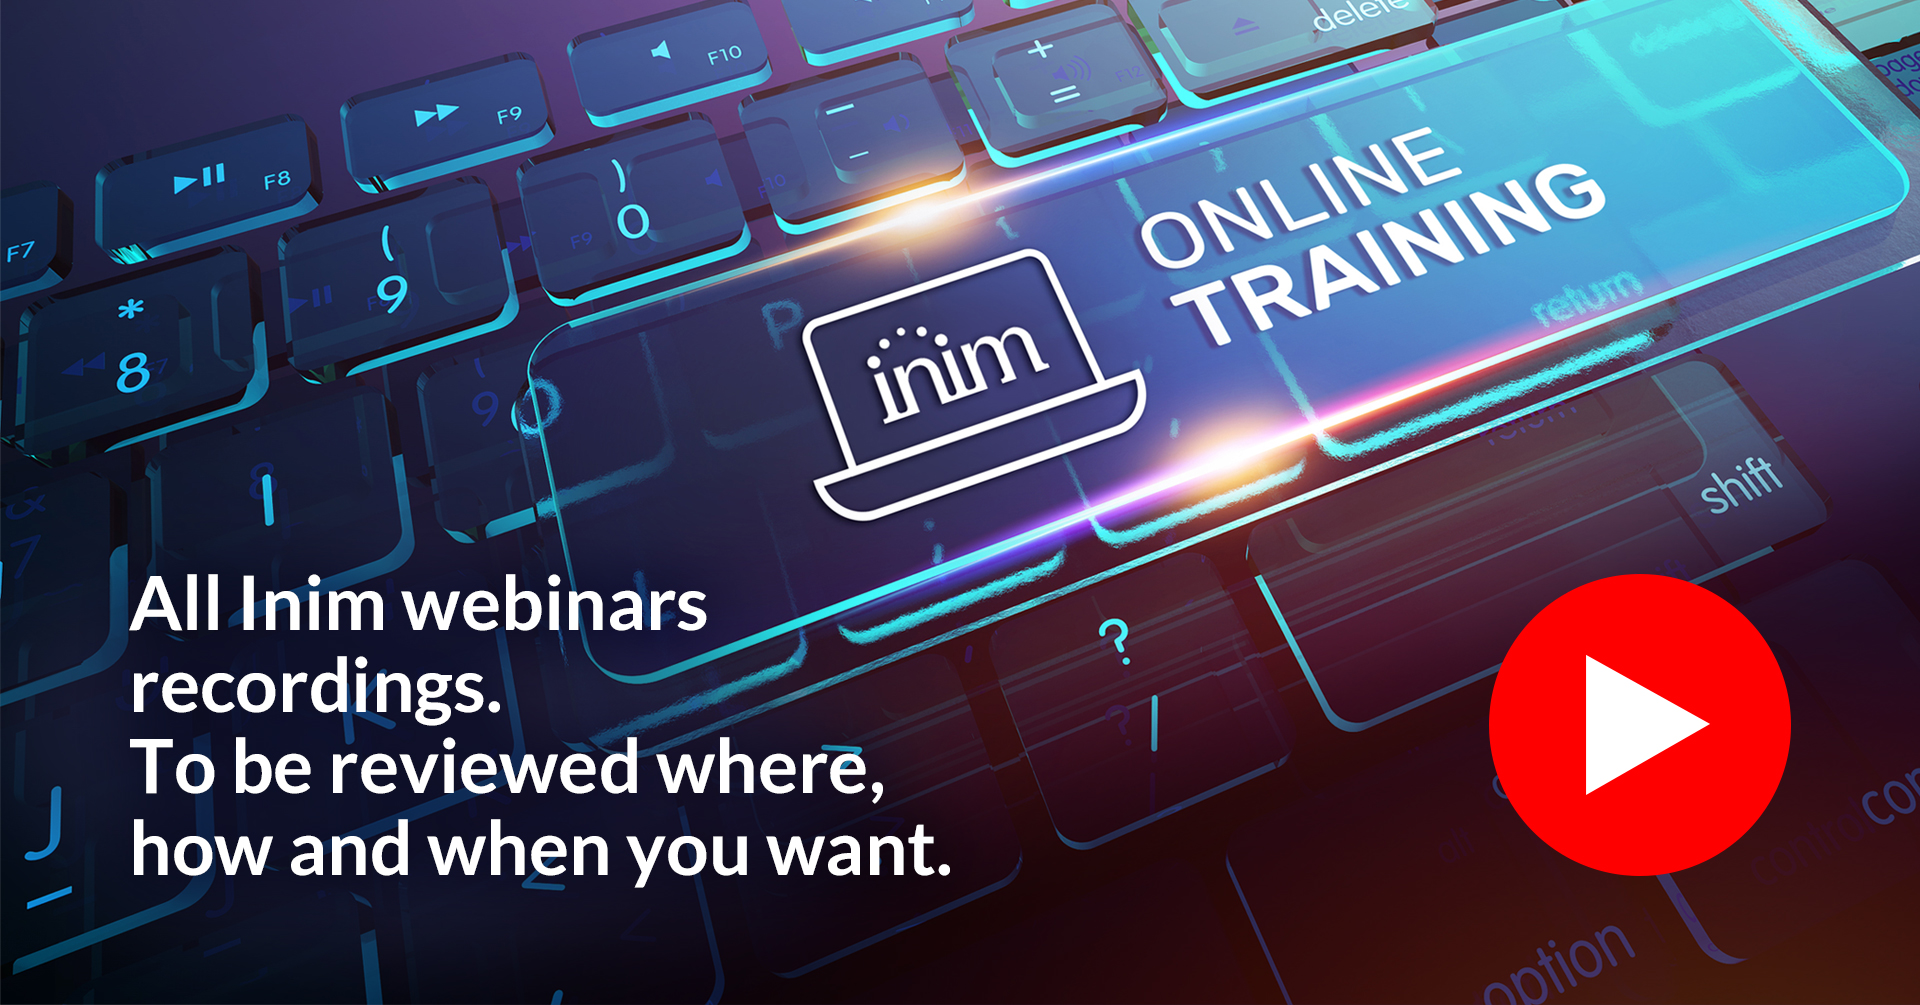 All Inim webinars videos recordings are available!